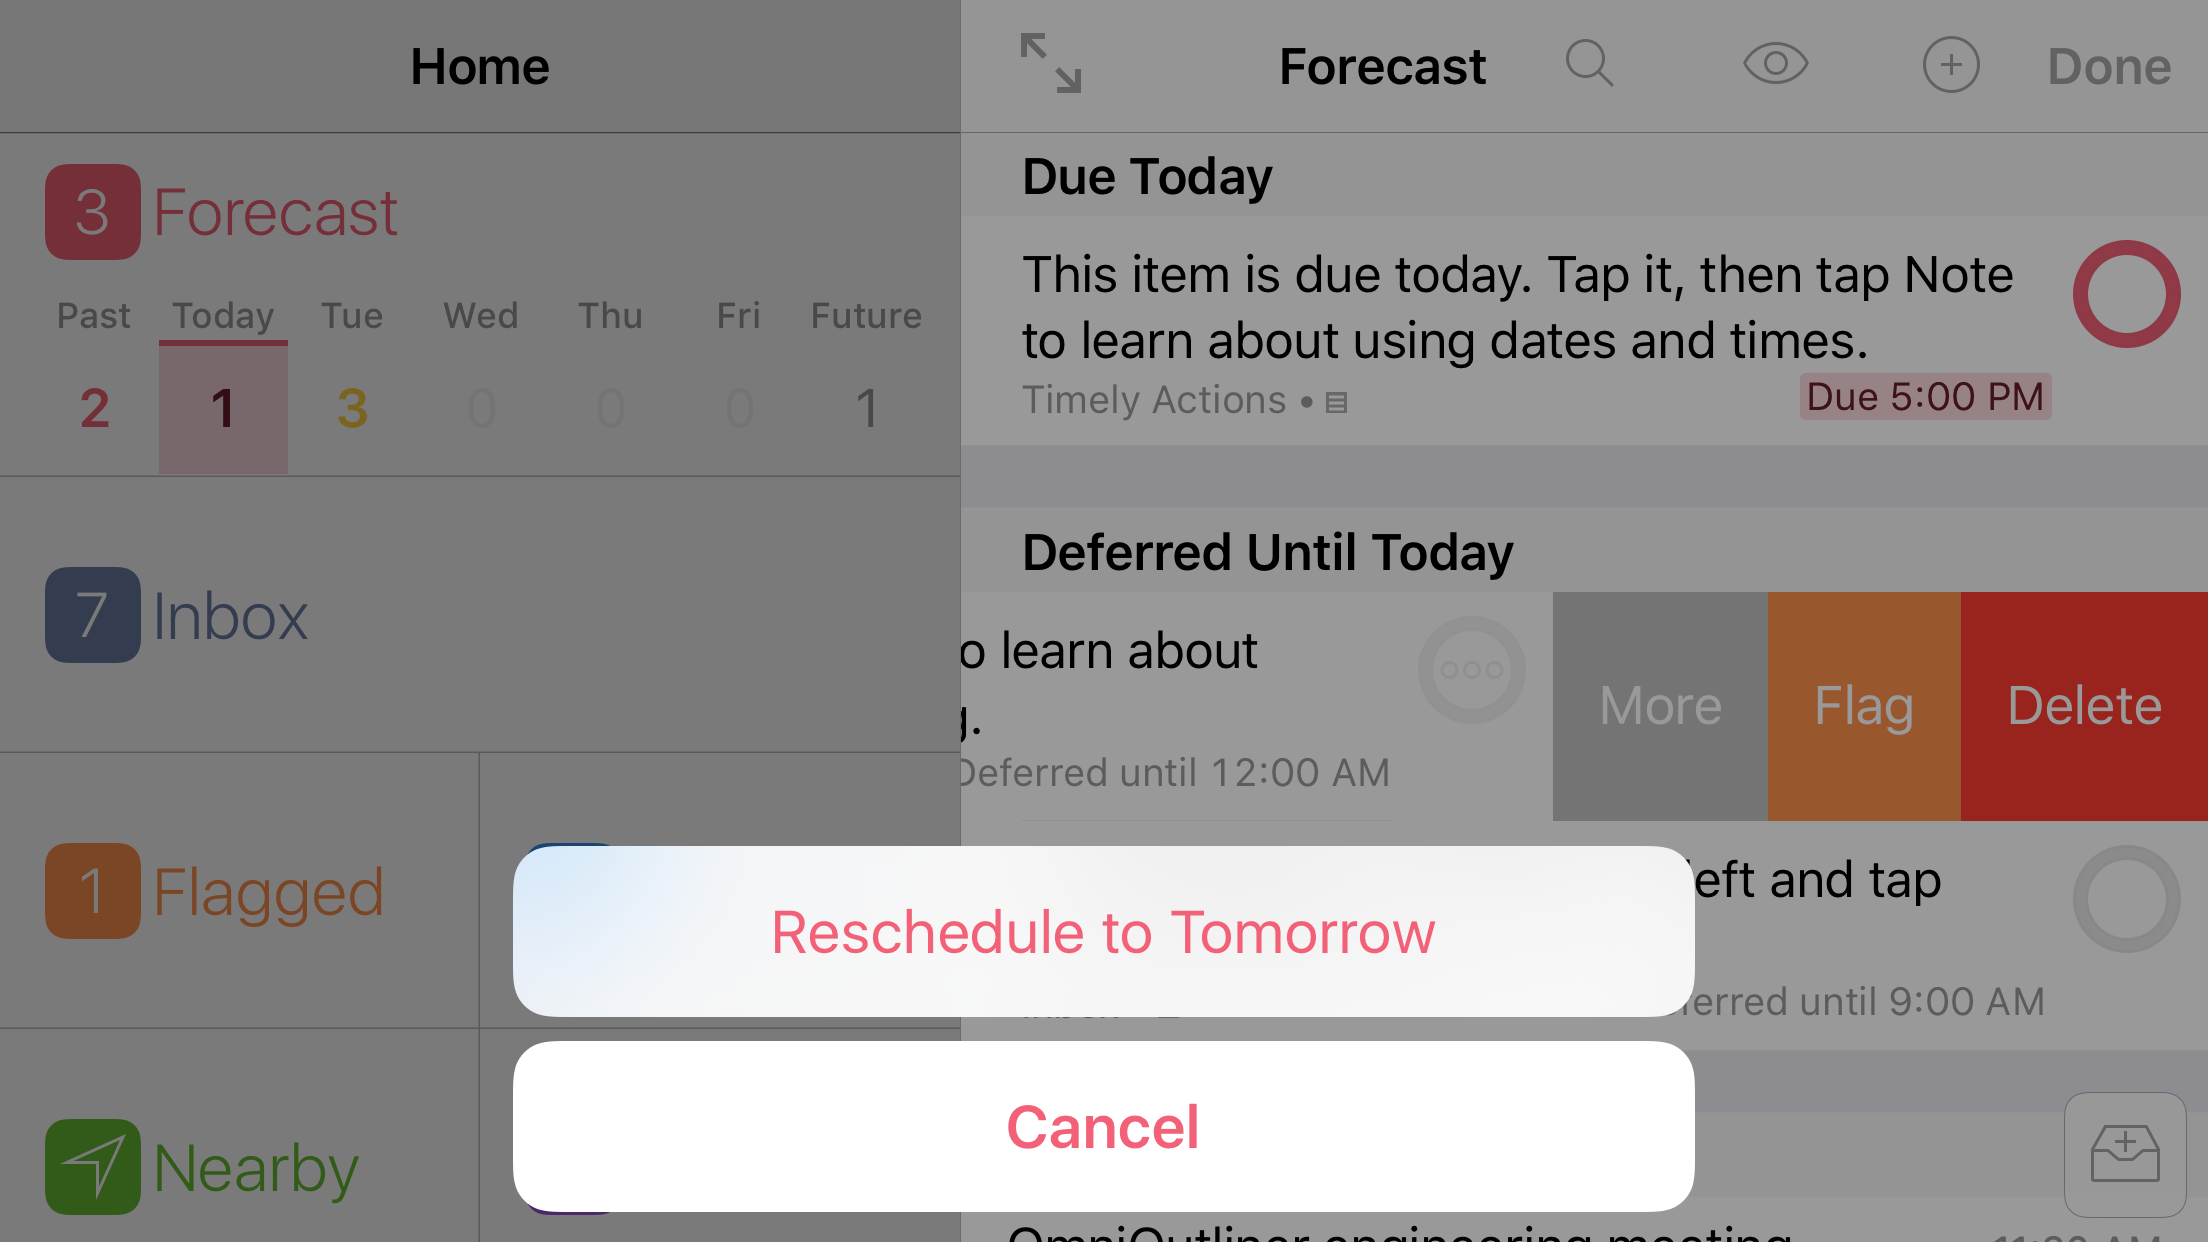 Rescheduling a deferred repeating action using the quick commands from the More menu.